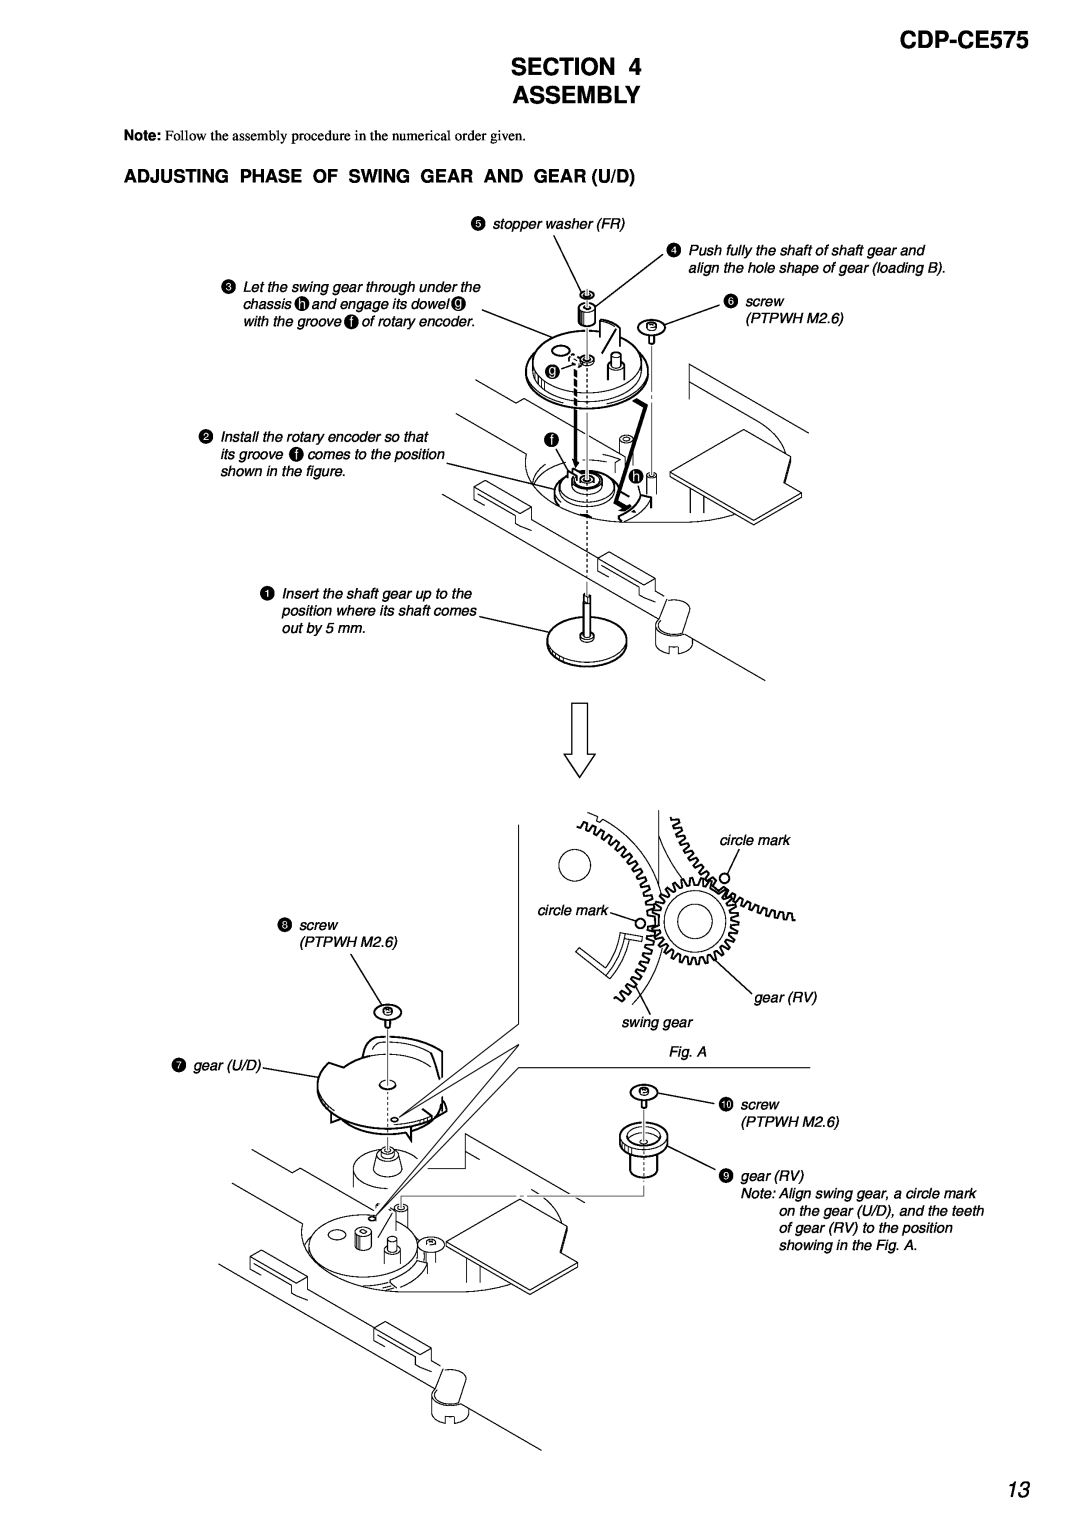 Sony service manual CDP-CE575 SECTION ASSEMBLY, Adjusting Phase Of Swing Gear And Gear U/D, g f h 